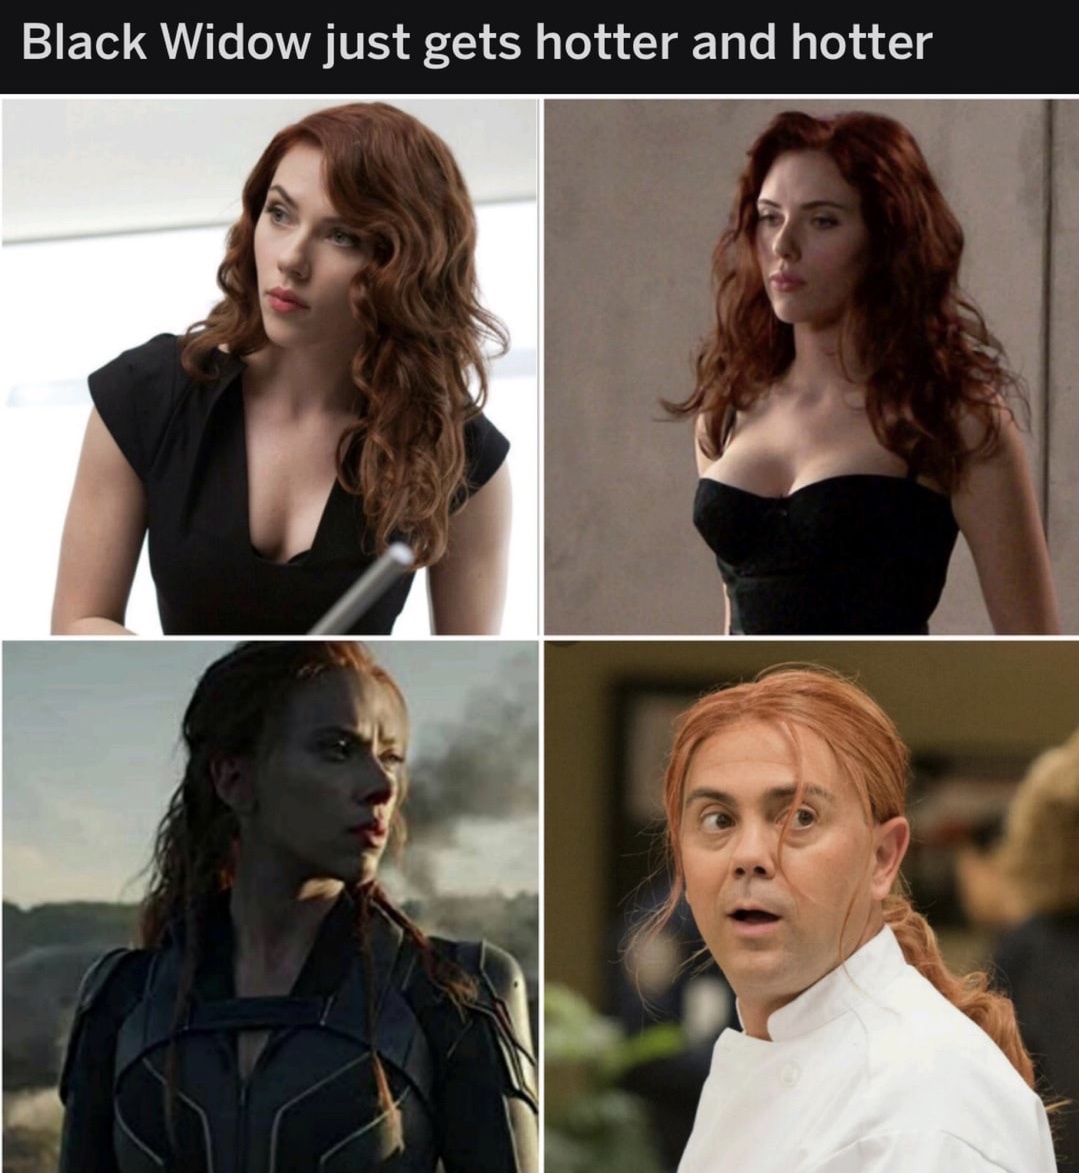 long hair - Black Widow just gets hotter and hotter